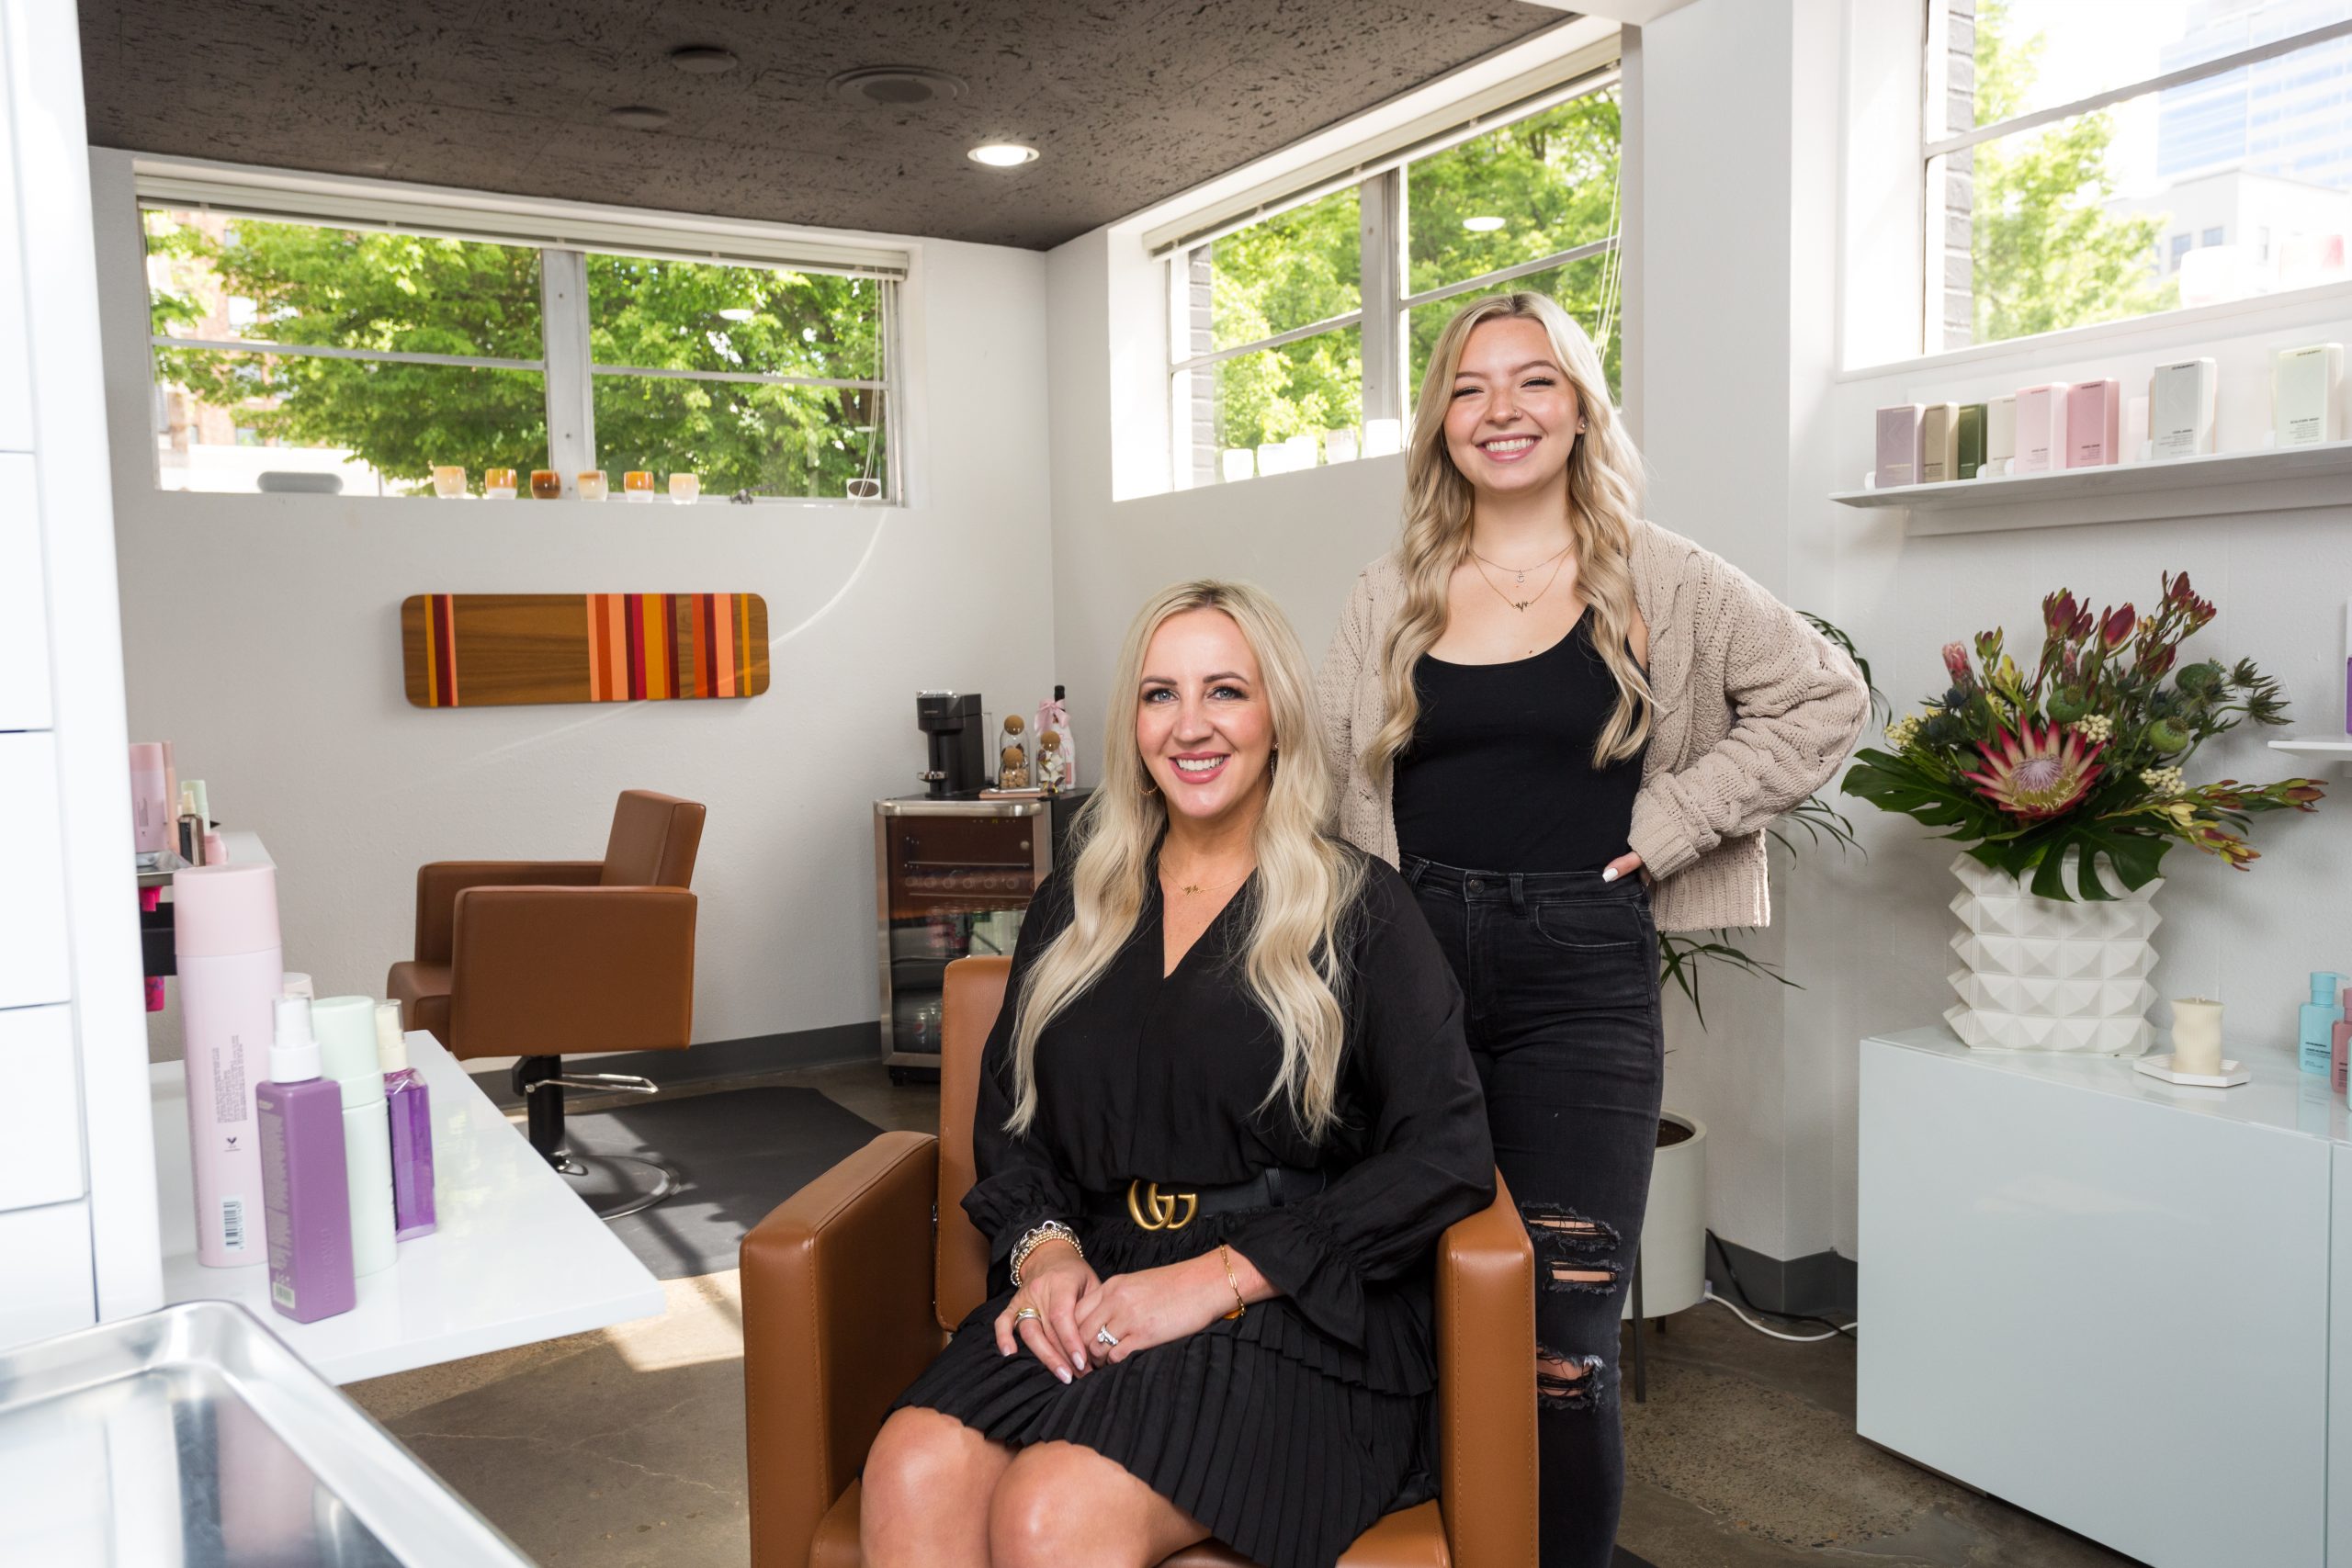 Muse Hair Design is a Woodland hair extension salon